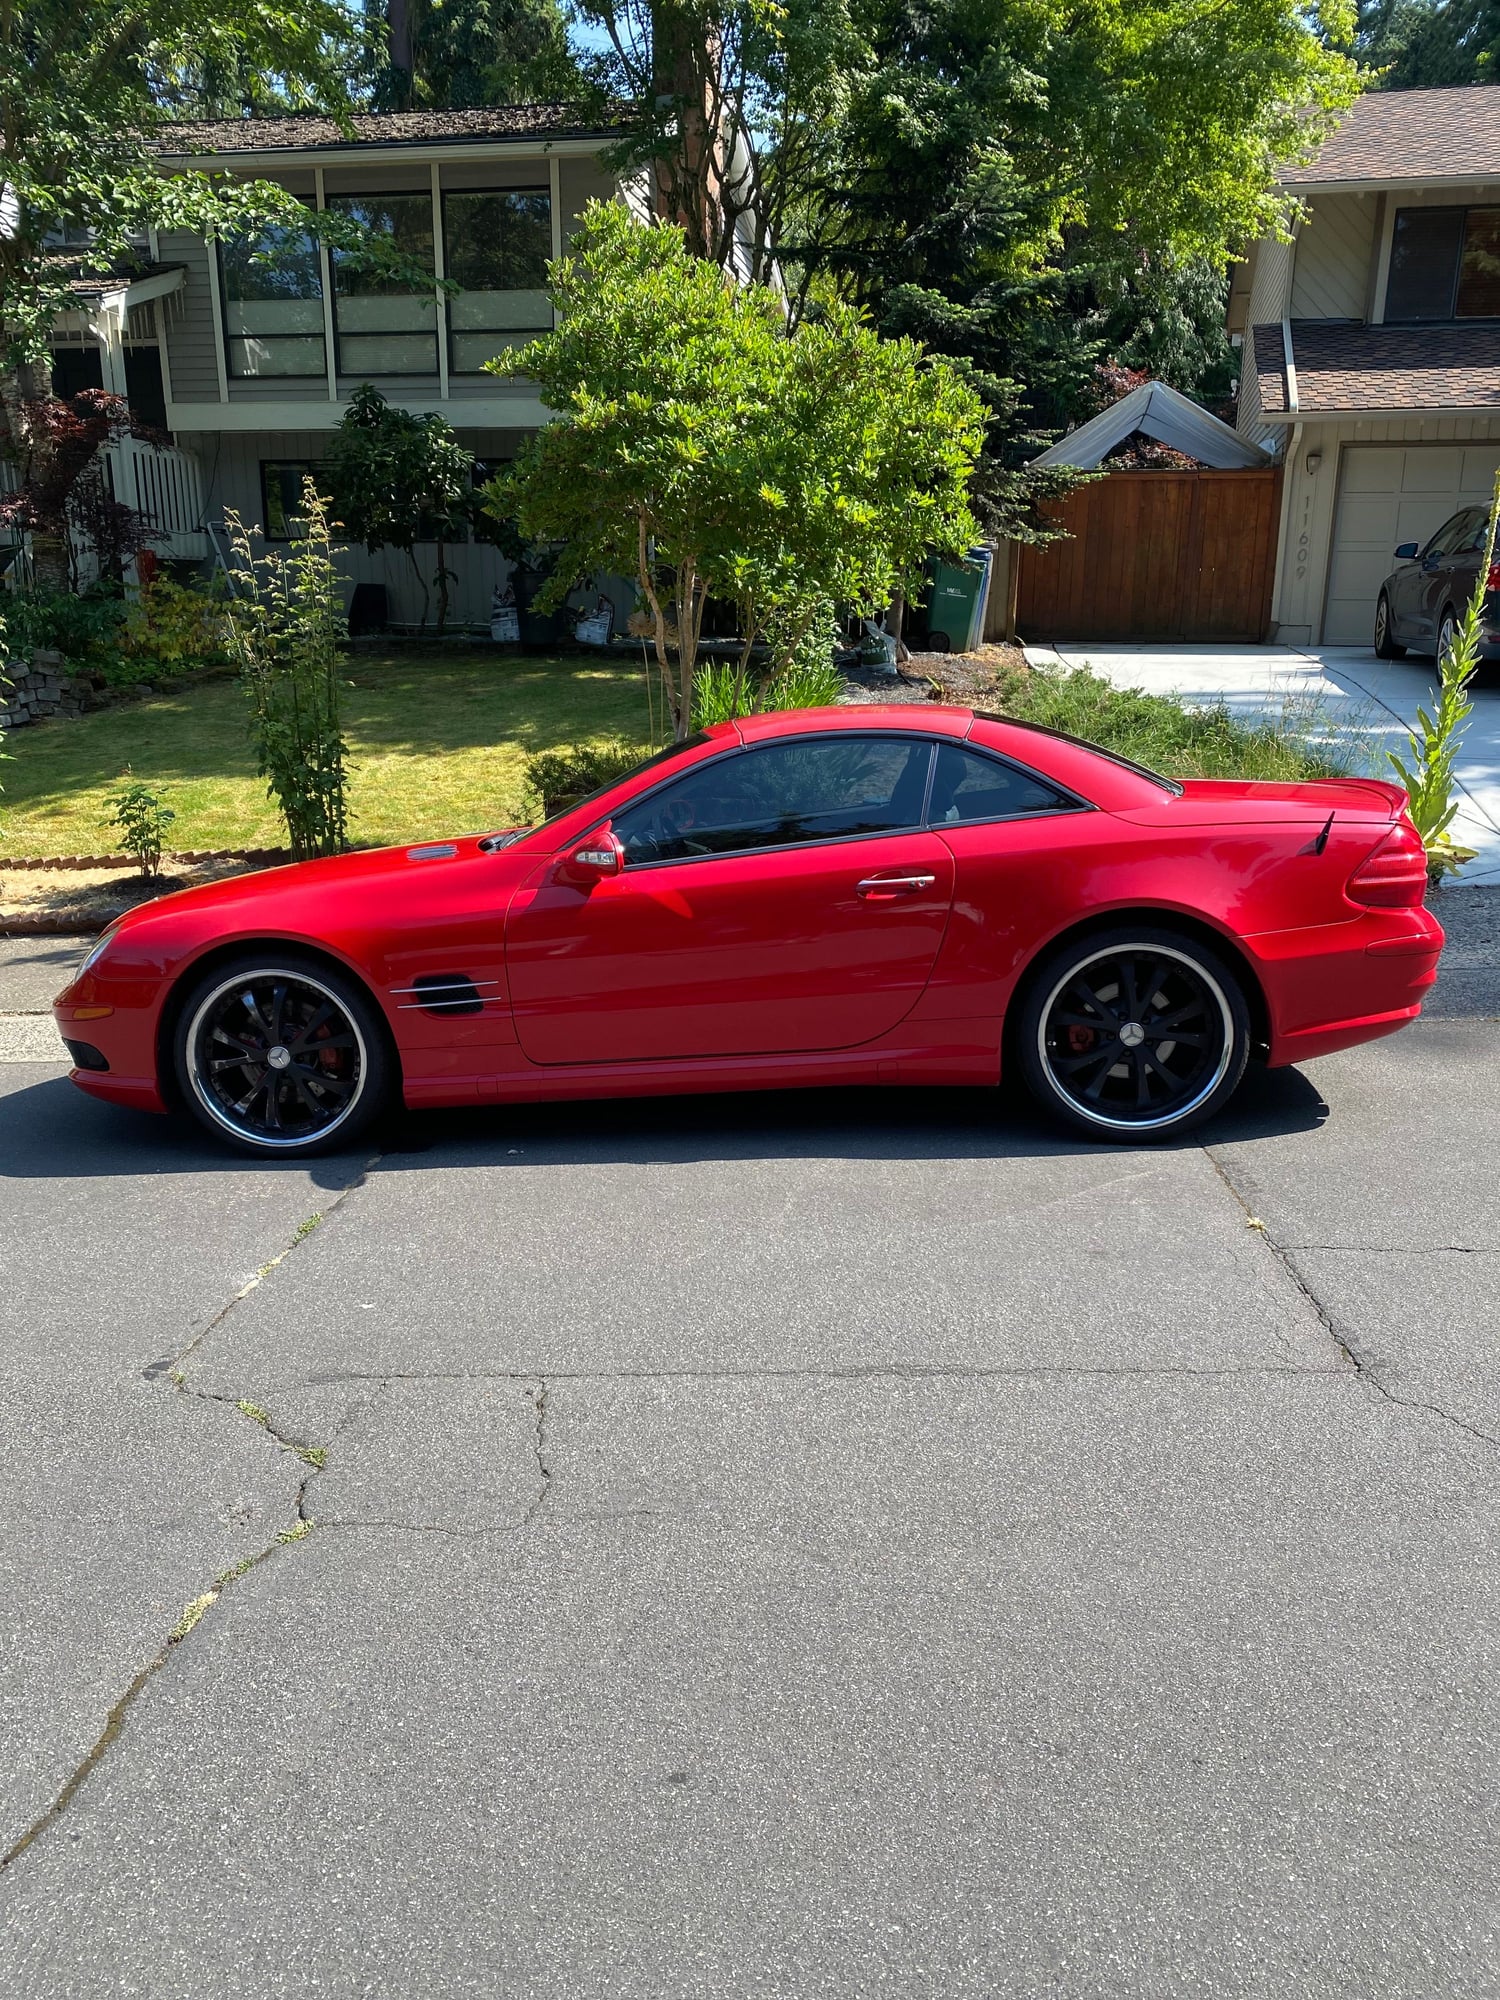 2003 Mercedes-Benz SL500 - 2003 SL500, 98kMiles - Used - VIN WDBSK75F23F023028 - 98,000 Miles - 8 cyl - 2WD - Automatic - Convertible - Red - Seattle, WA 98033, United States